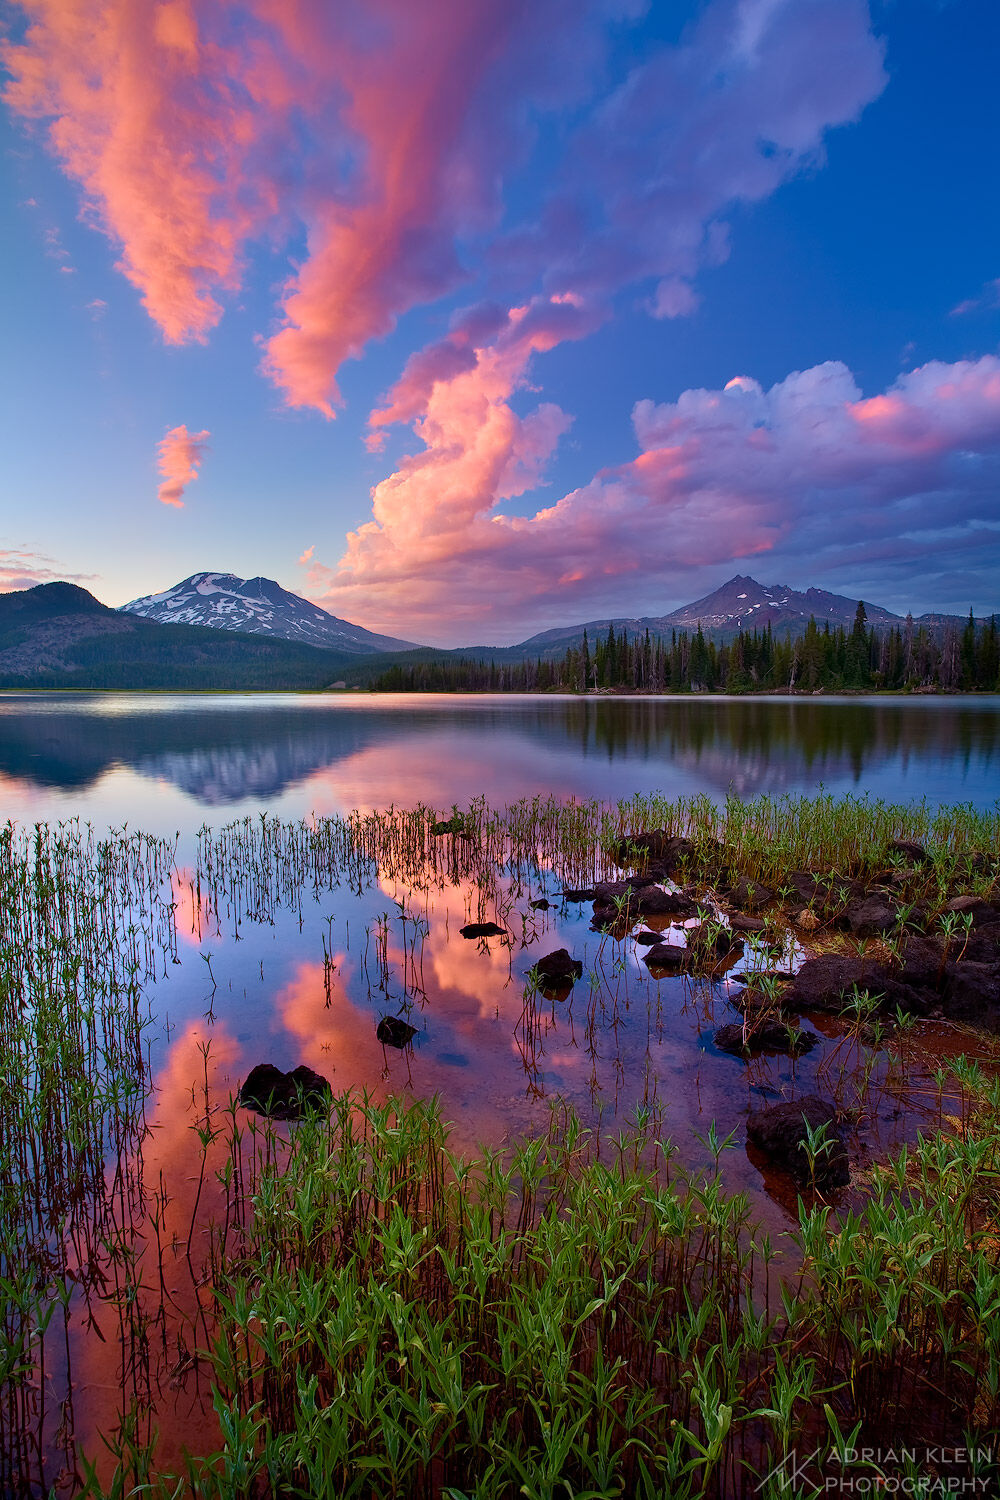 Clouds at sunset reflect in Sparks Lake in the high desert of Central Oregon.